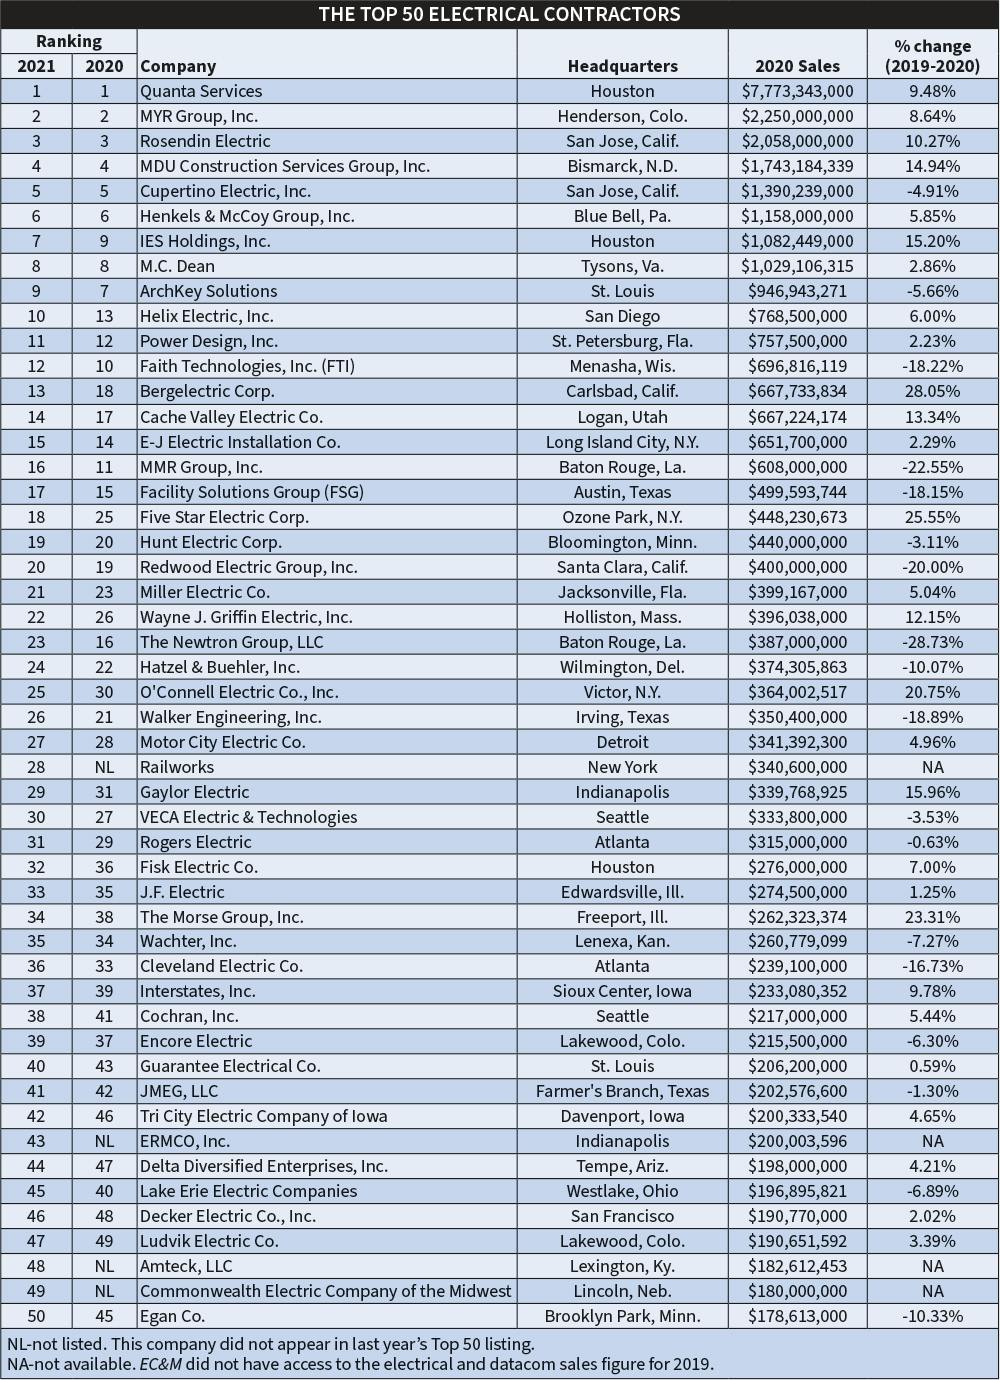 Table 1. 2021 Top 50 electrical contractor rankings based on 2020 revenue numbers.